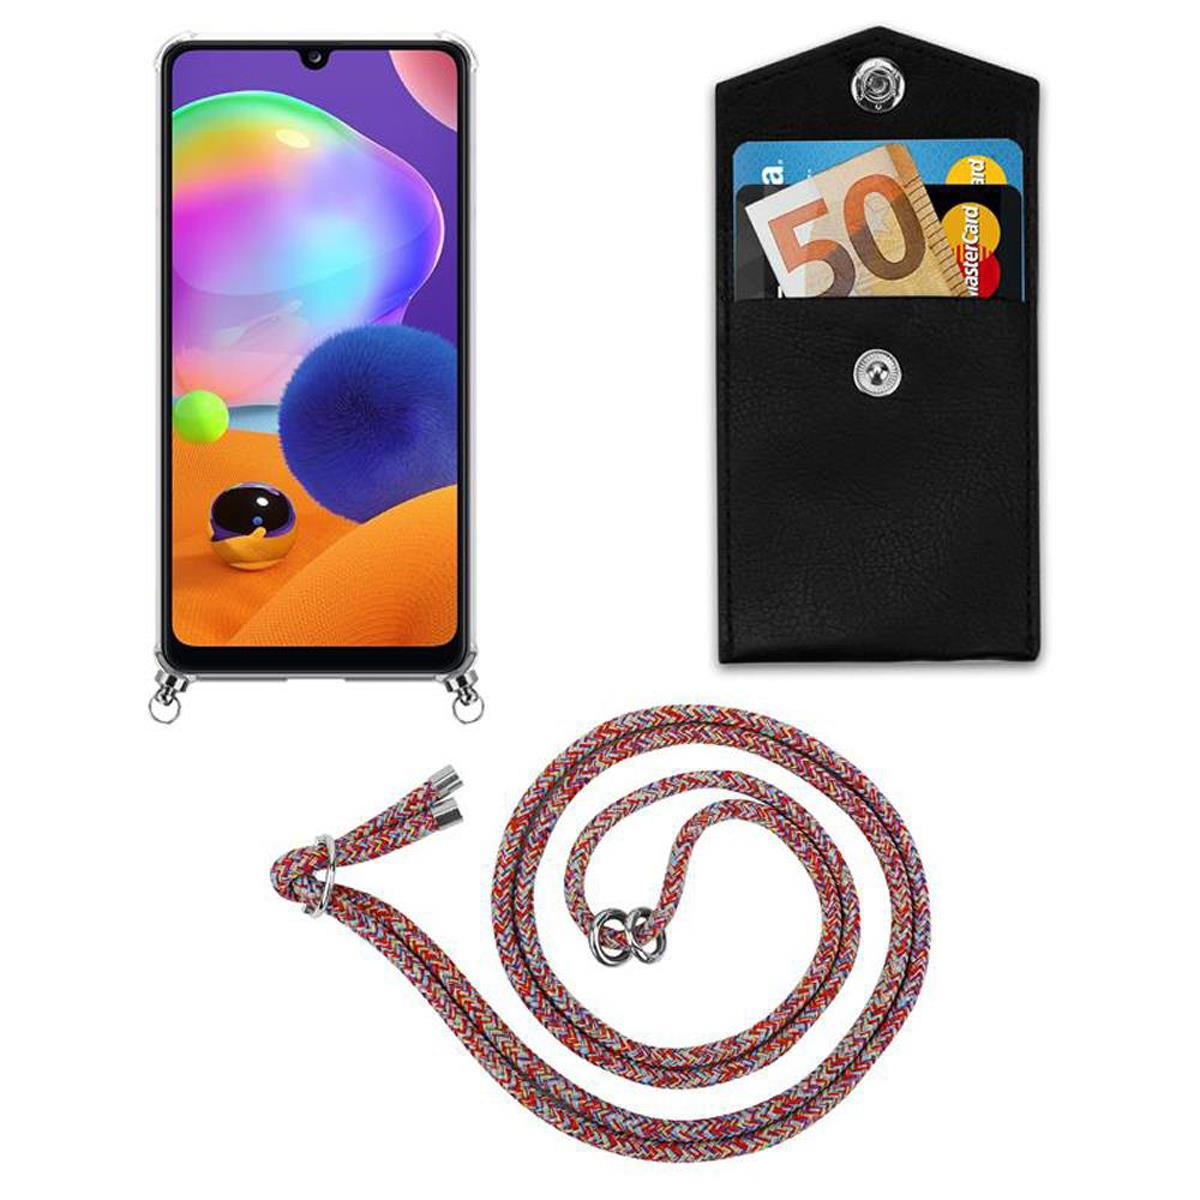 Kordel Backcover, PARROT Silber Ringen, A31, Galaxy COLORFUL mit Kette Handy abnehmbarer Band CADORABO und Samsung, Hülle,